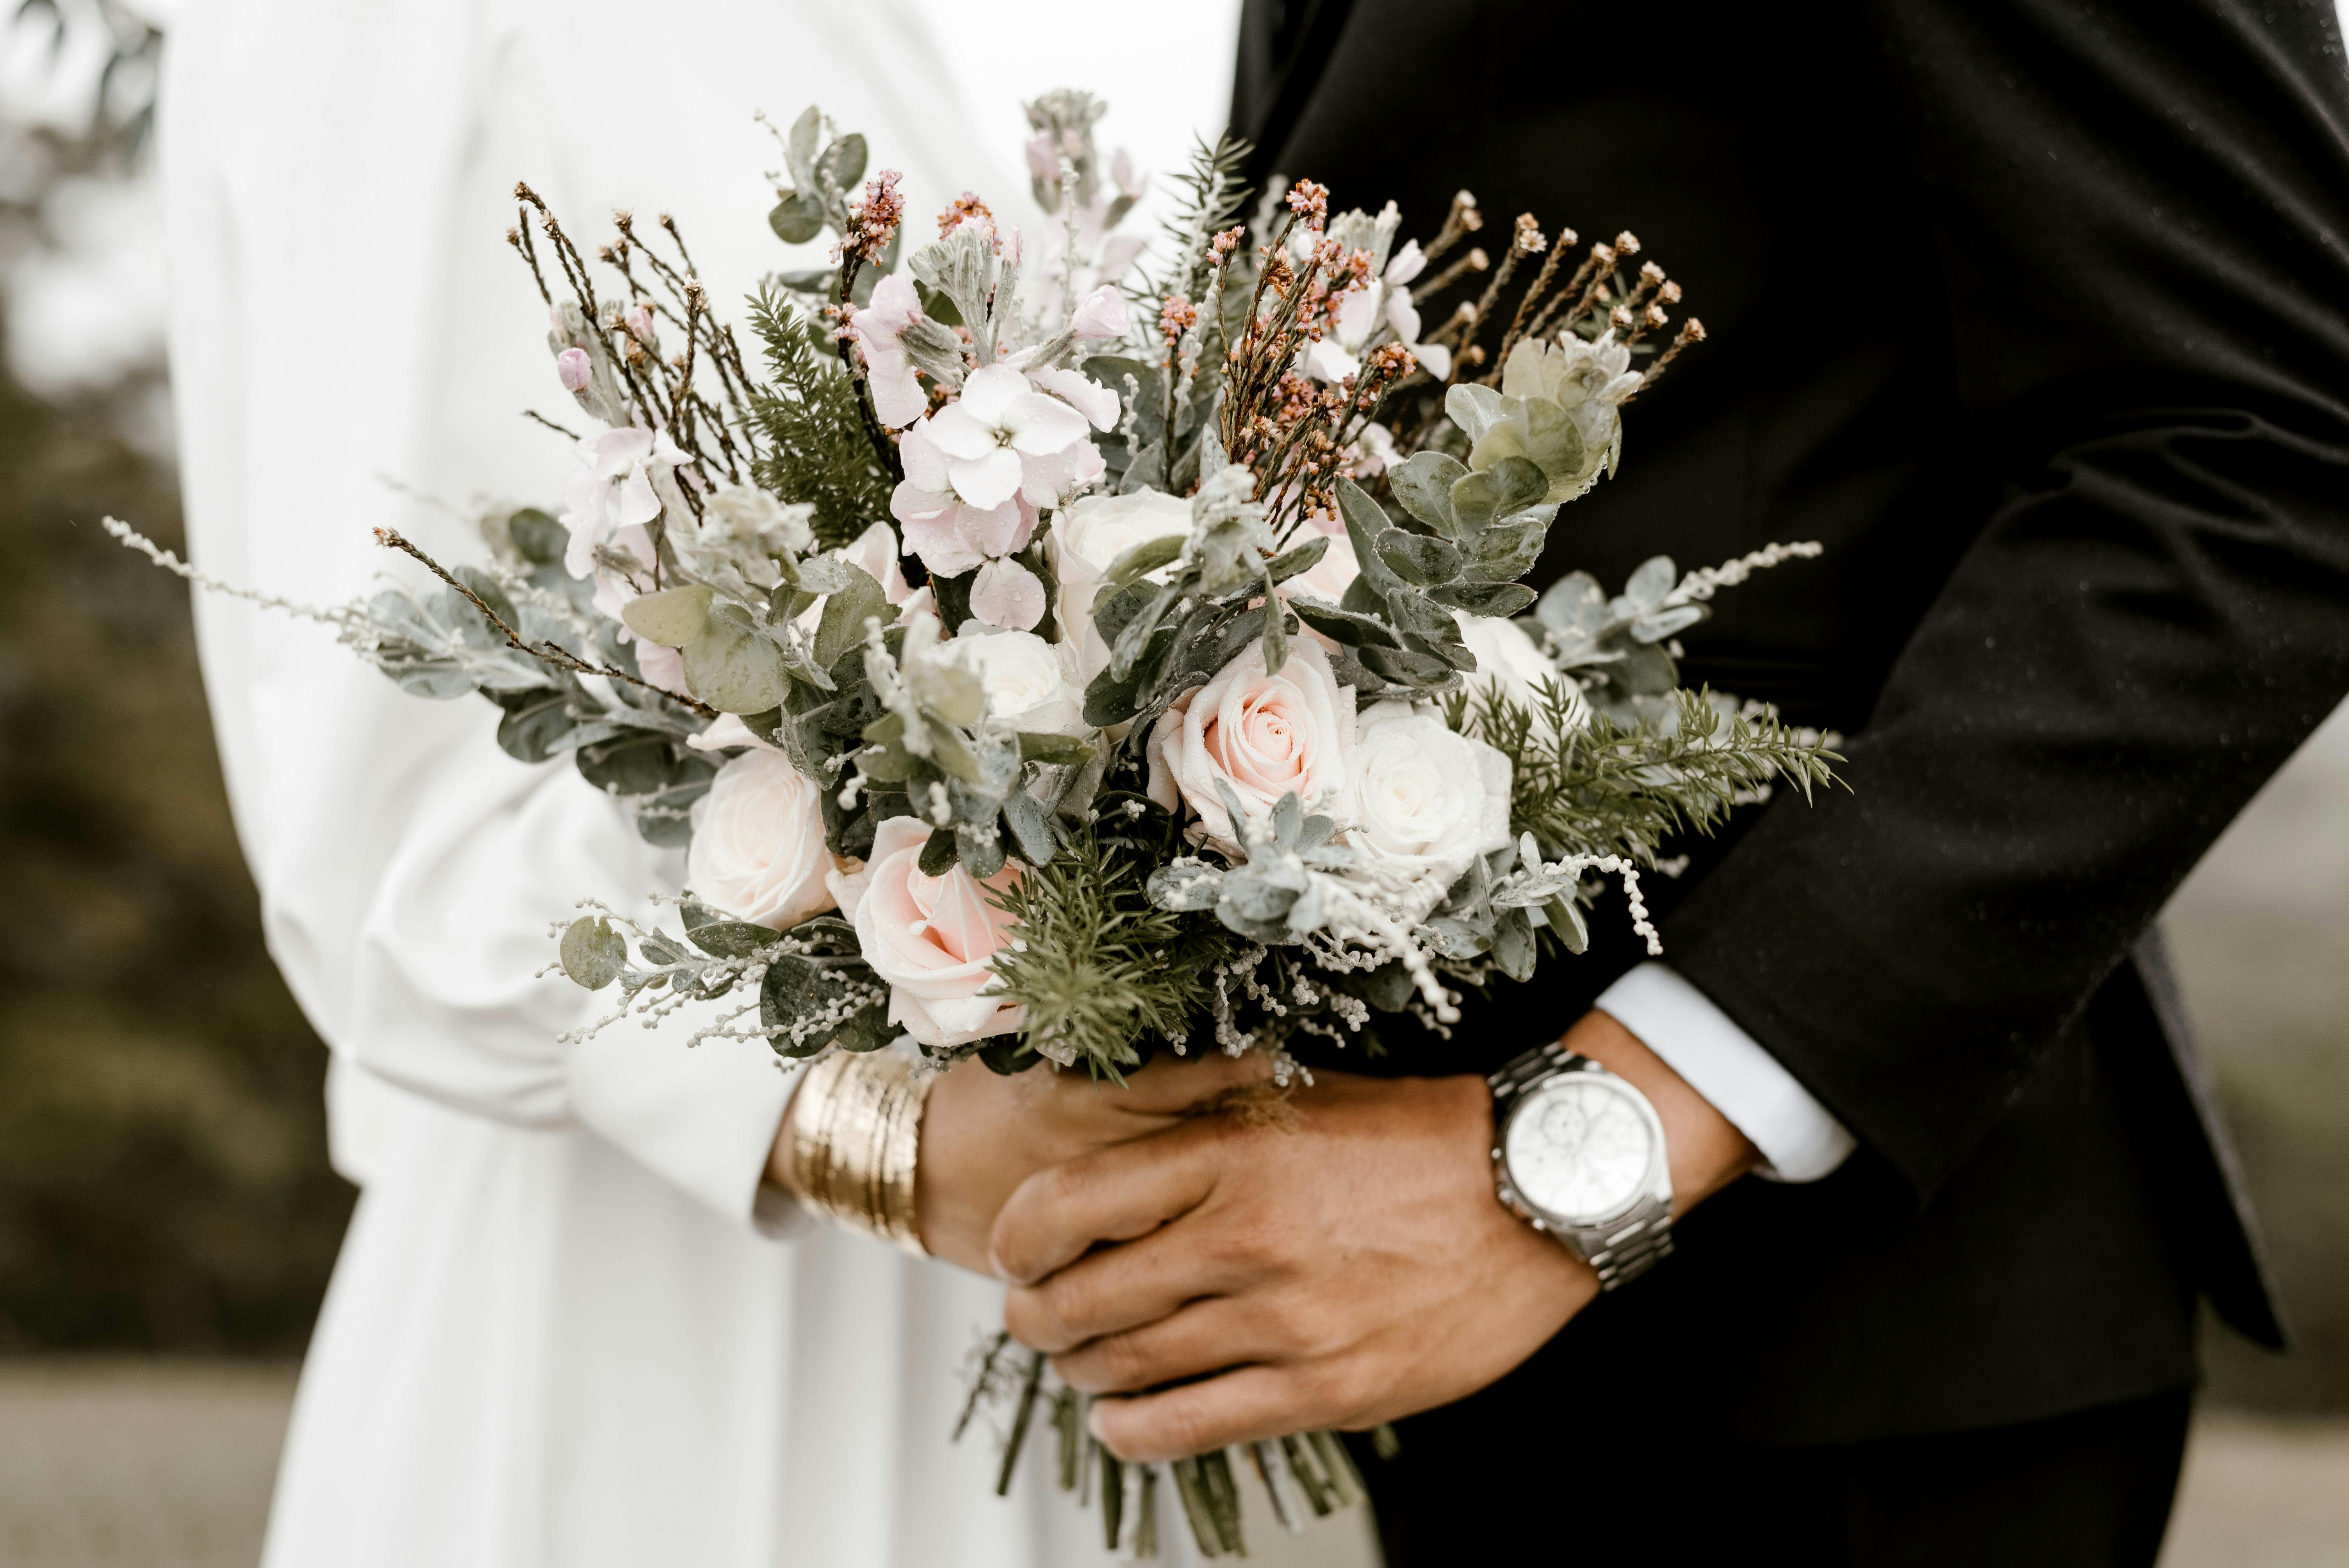 Groom and bride dance holding a wedding bouquet | Source: Pexels